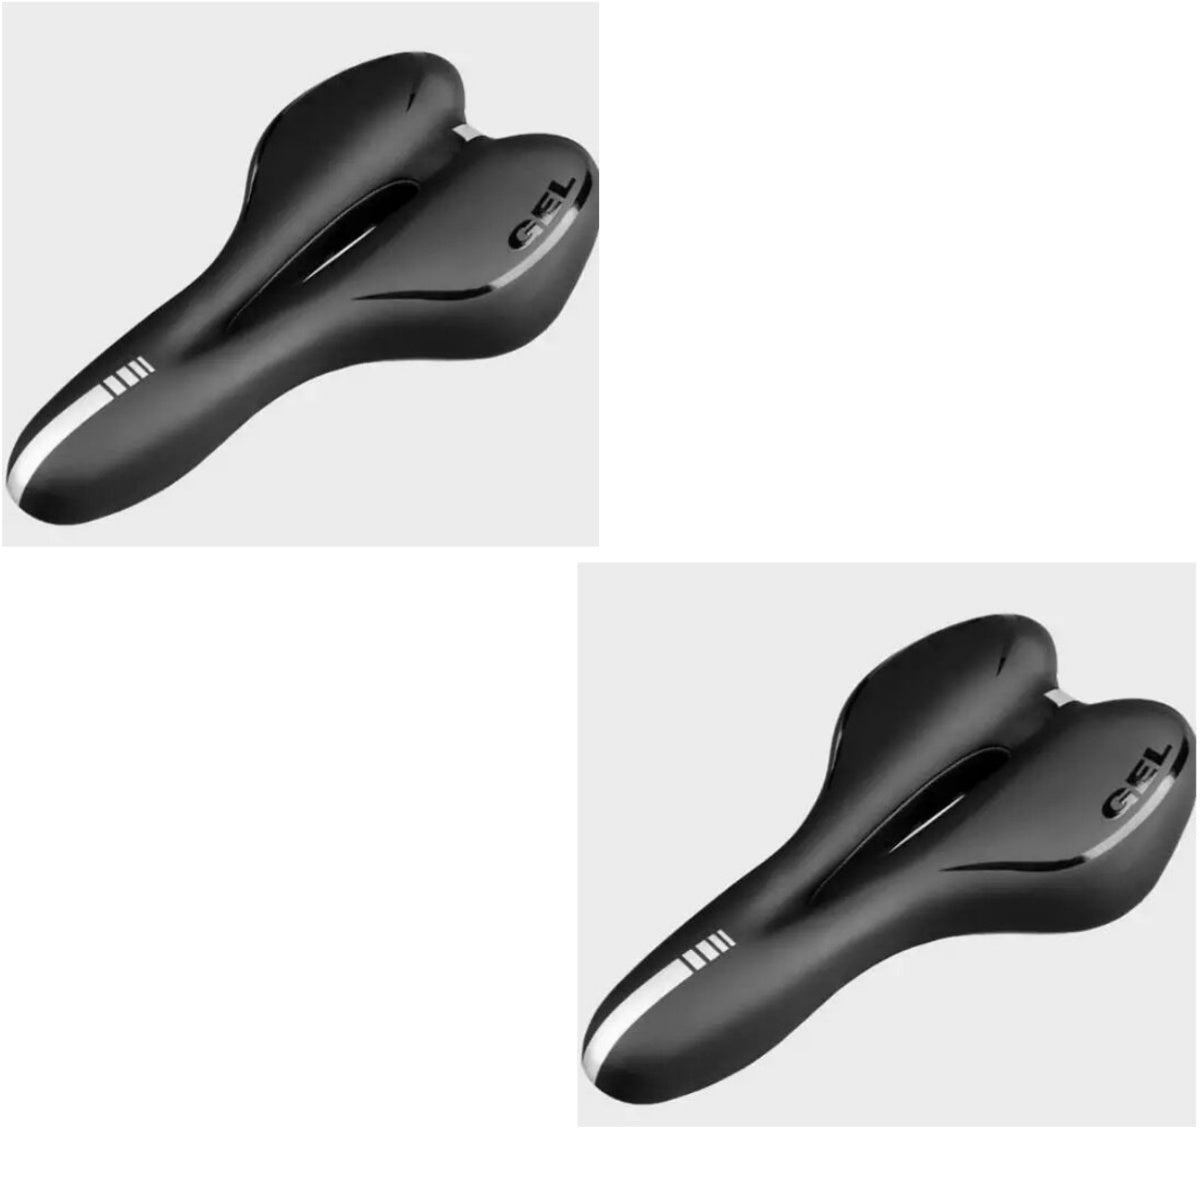 Bicycle seat suitable for mountain bike